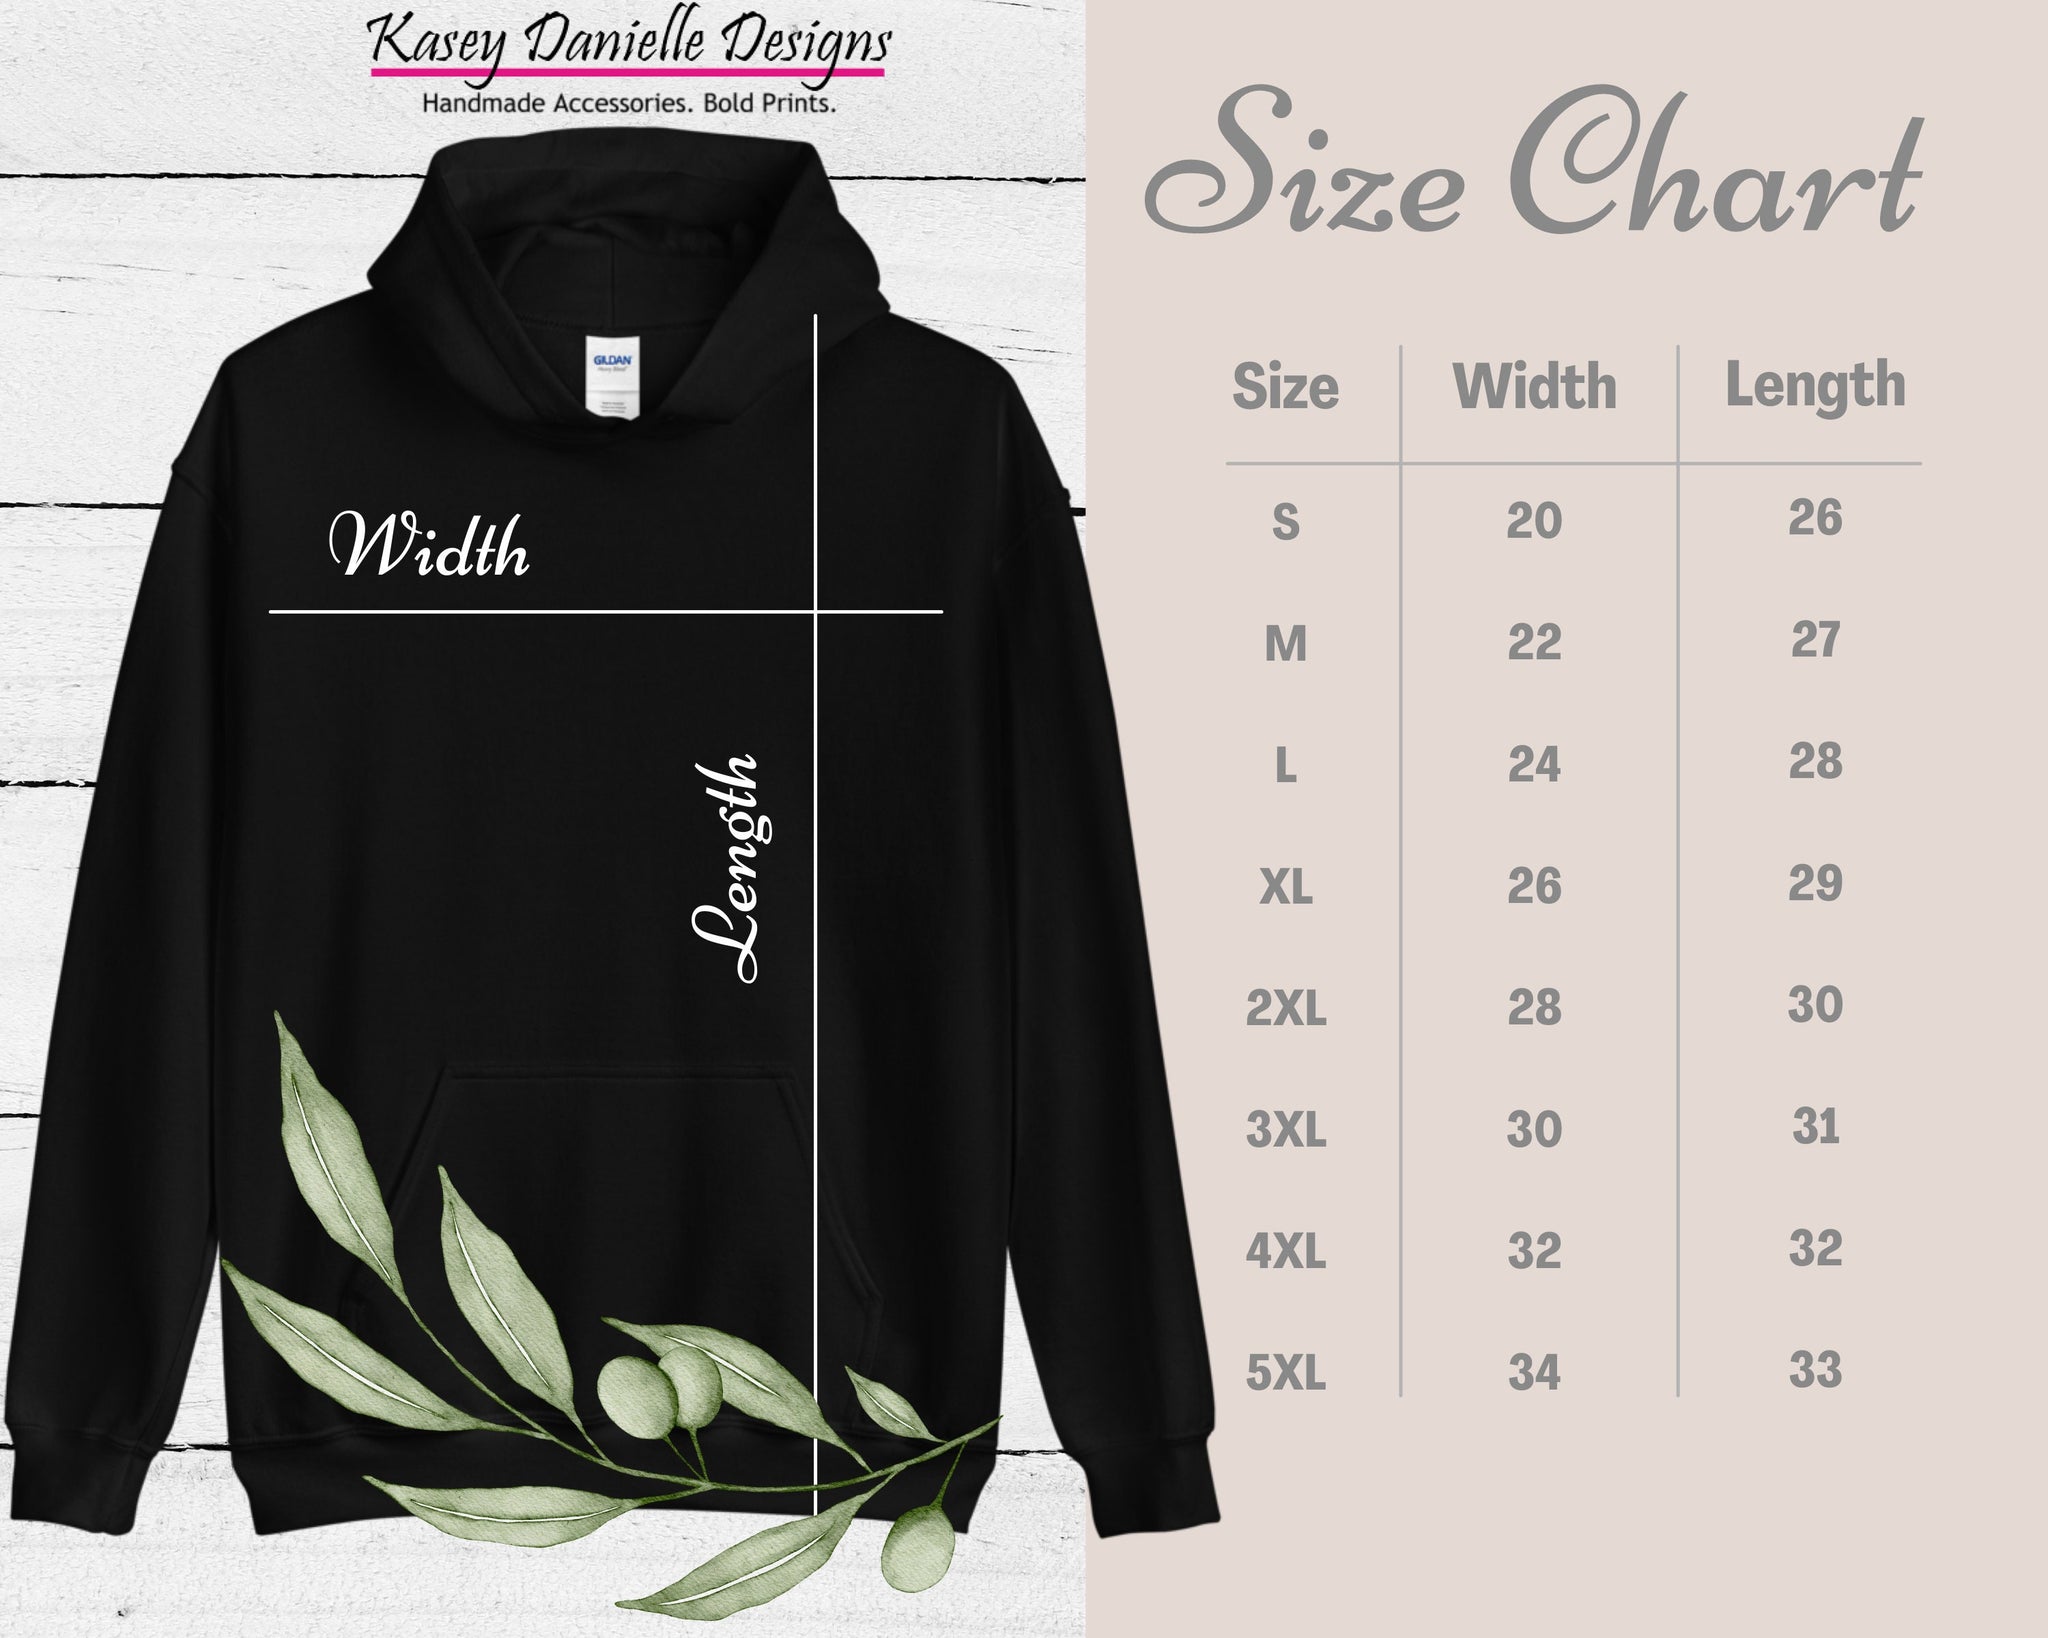 Custom Embroidered Matching Couple Hoodies - Personalized Couple Hoodies  with Your Initials